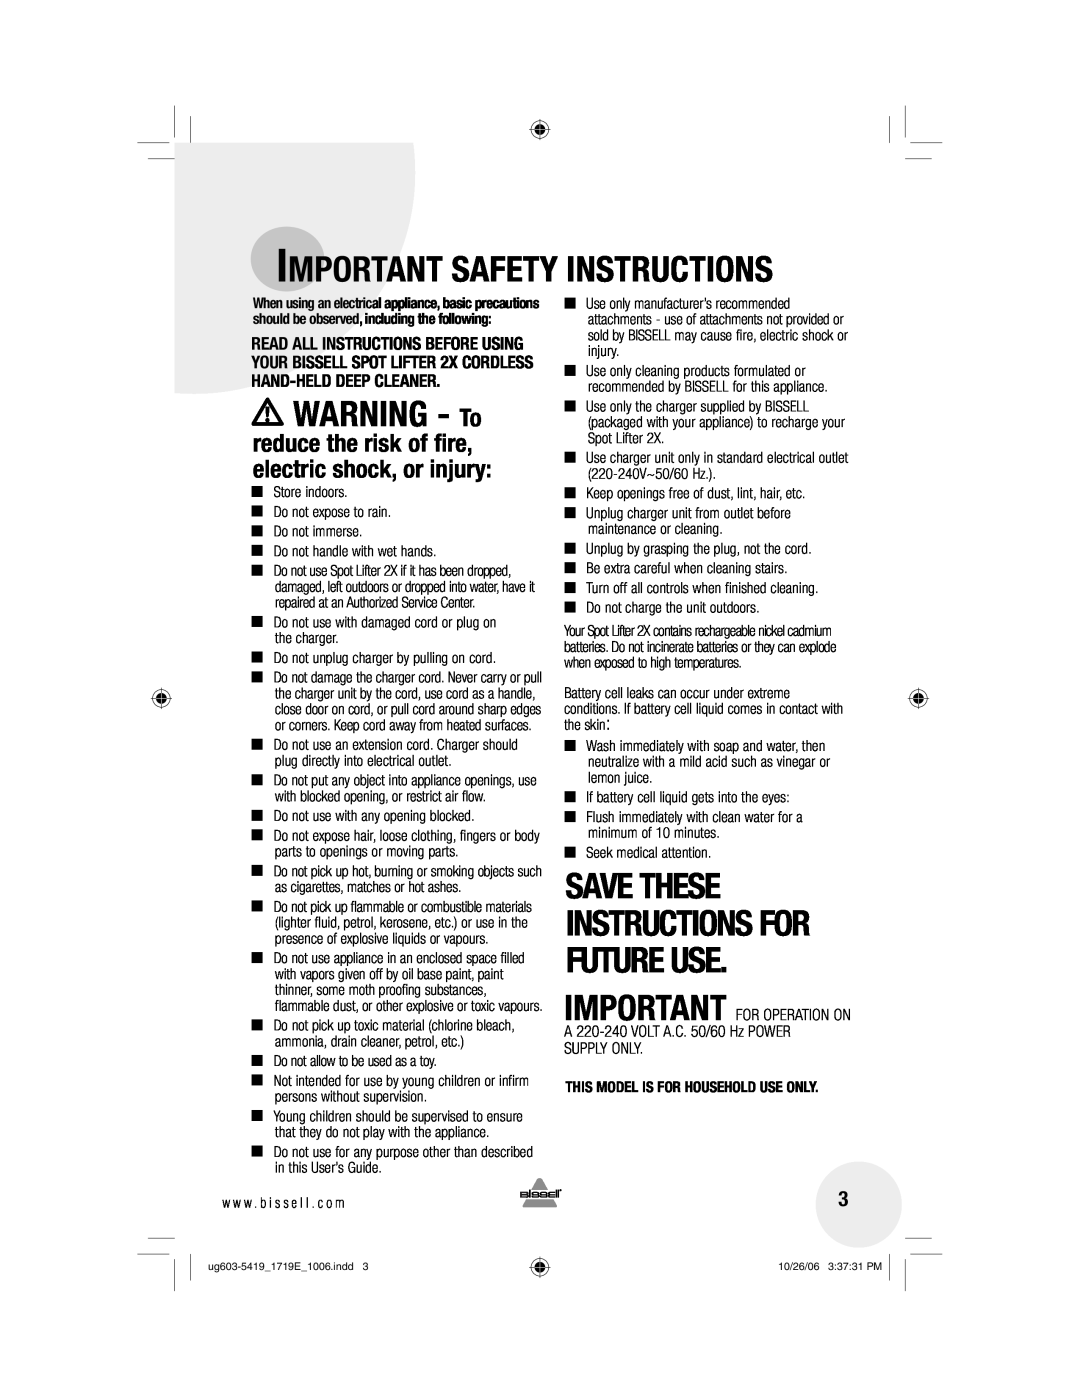 Bissell 1719 Save These Instructions For Future Use, reduce the risk of fire, electric shock, or injury, WARNING - To 